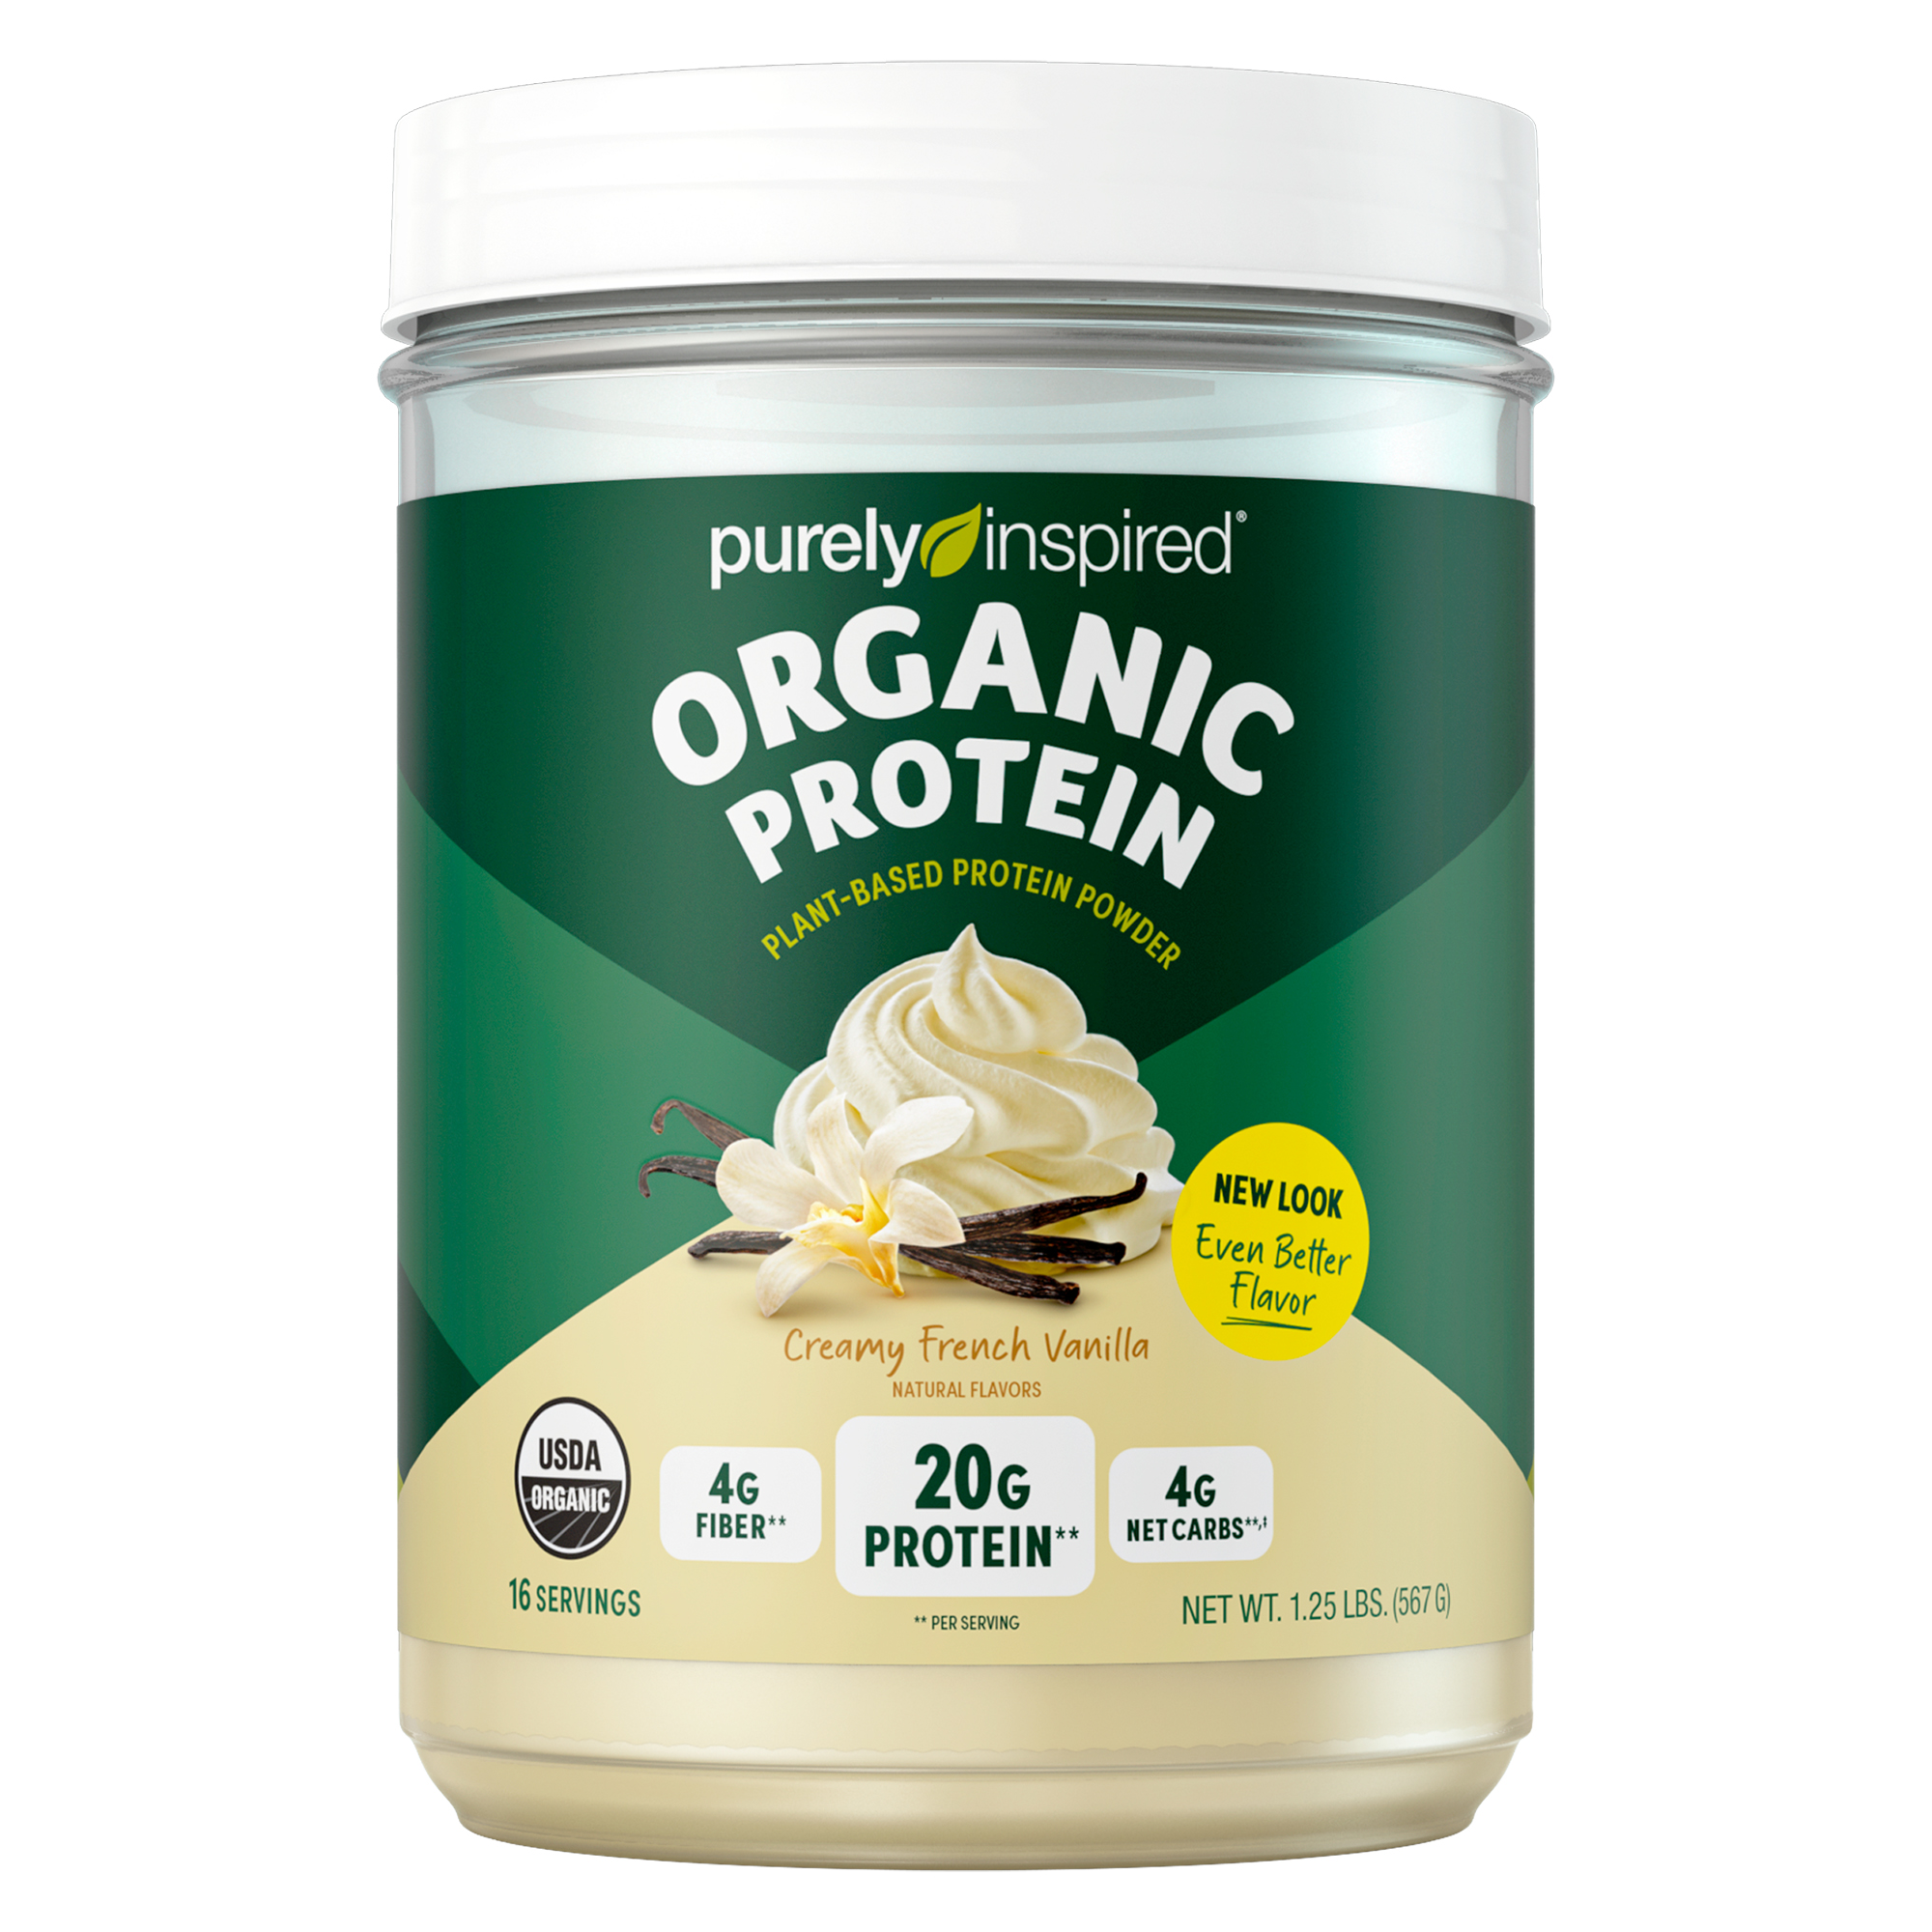 Purely Inspired Organic Plant-Based Protein Powder, Vanilla, 20g Protein, 1.25 lbs, 16 Servings - image 1 of 10